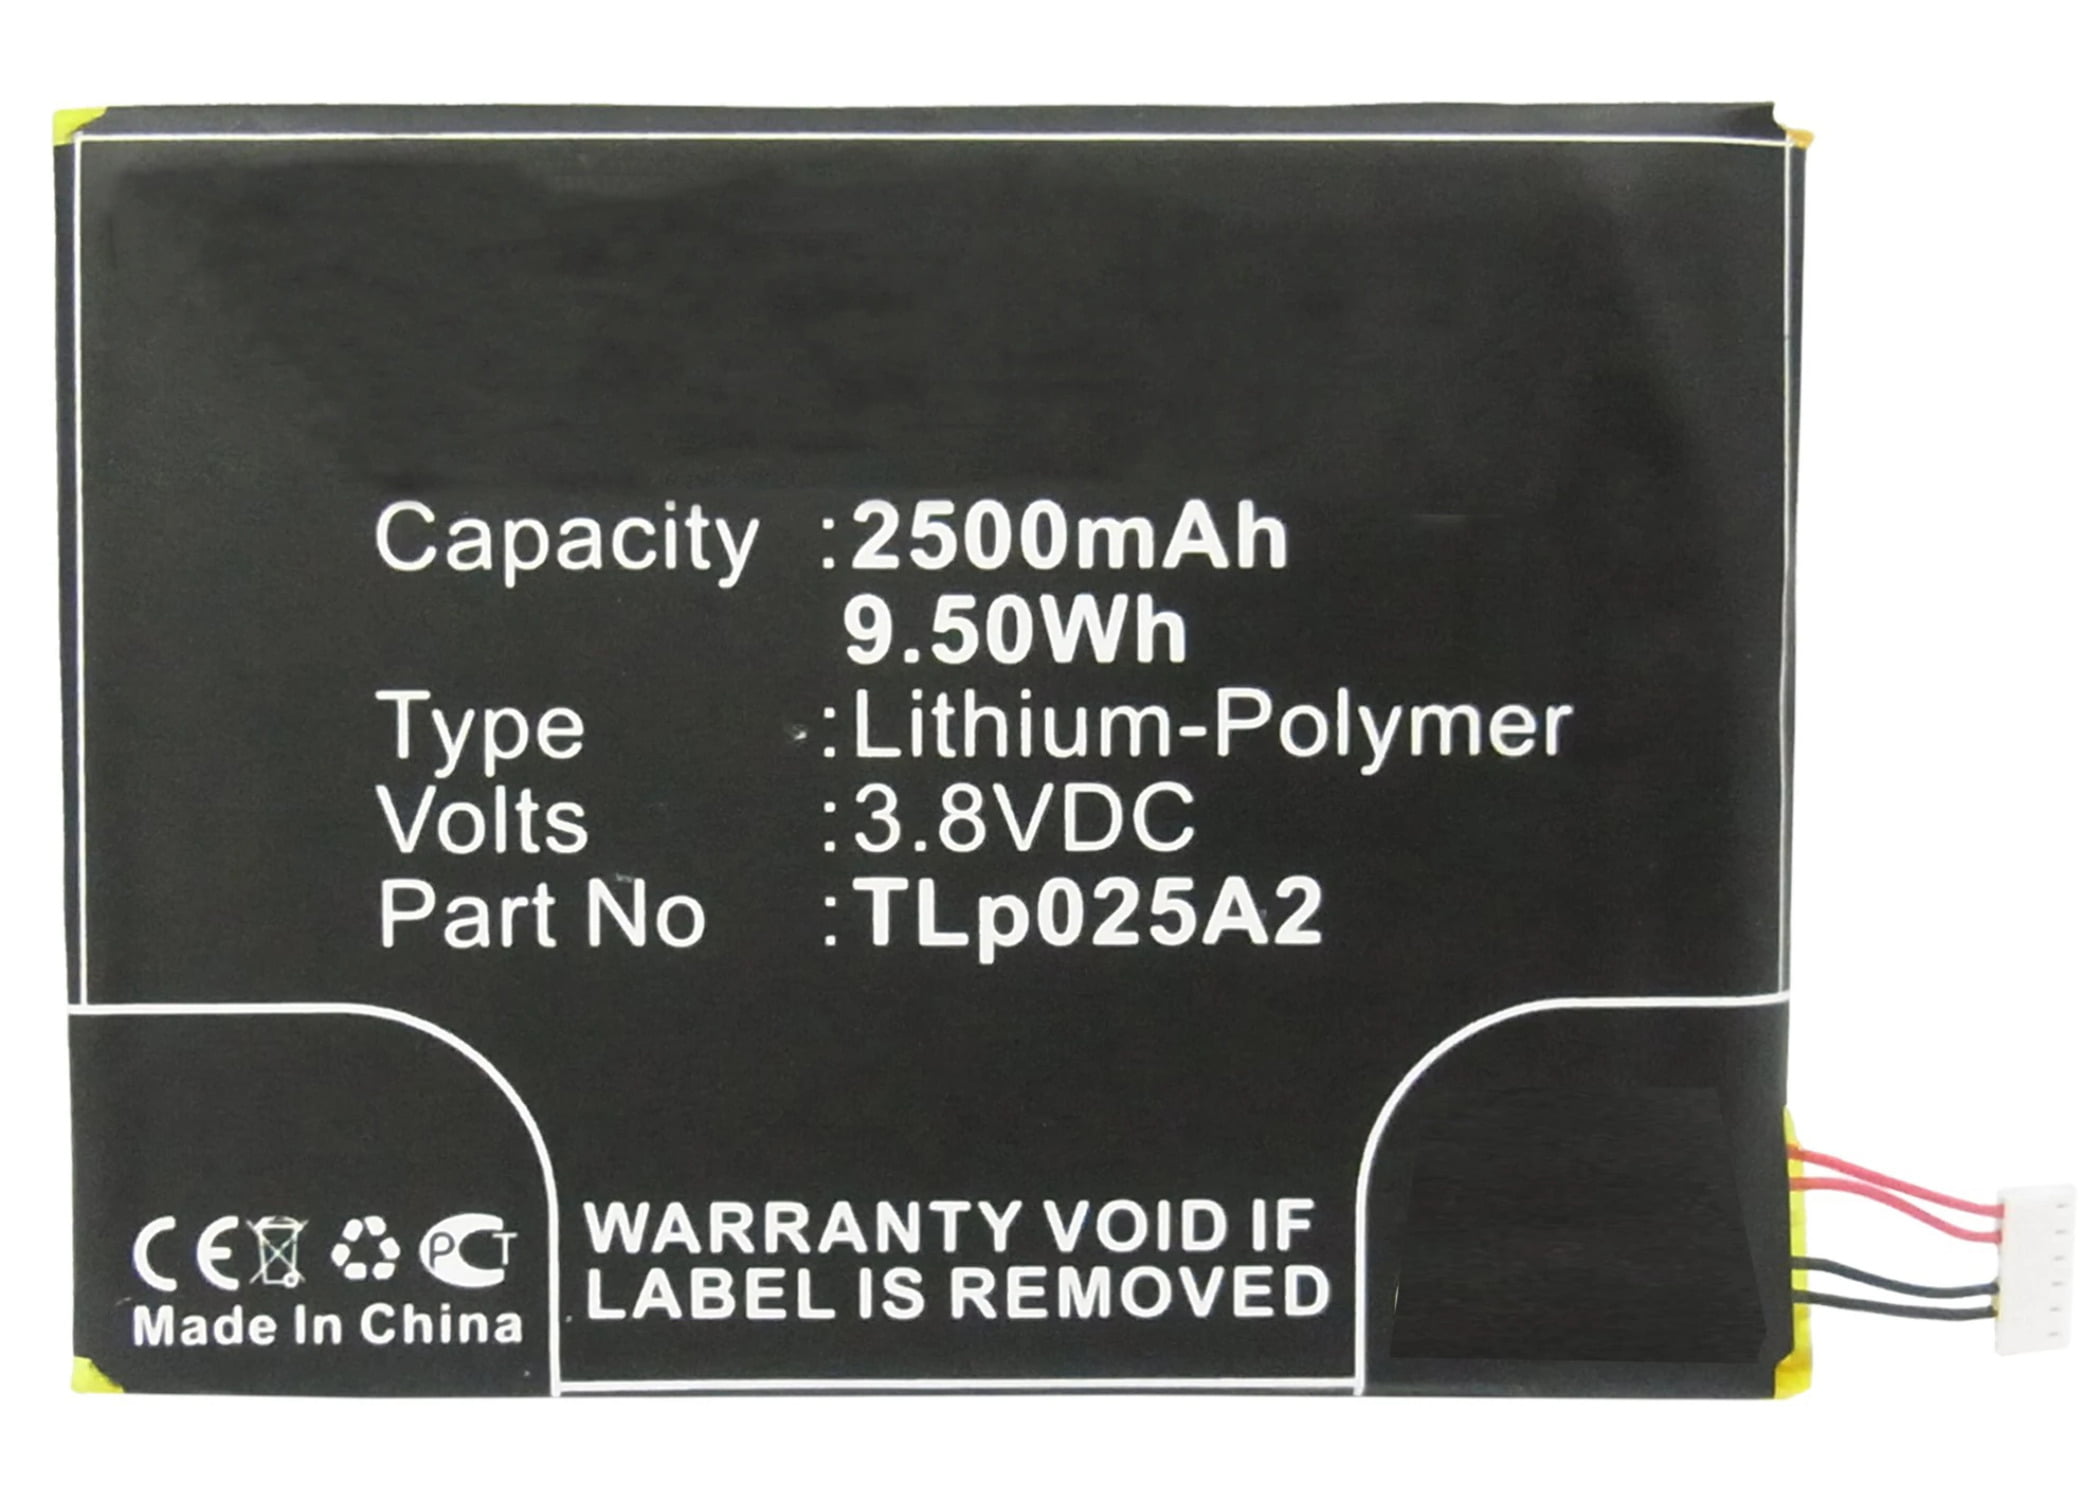 600mAh, 3.7V, Lithium-Ion Logitech G7 Battery Replacement for Logitech L-LL11 Mouse Battery 2X Pack